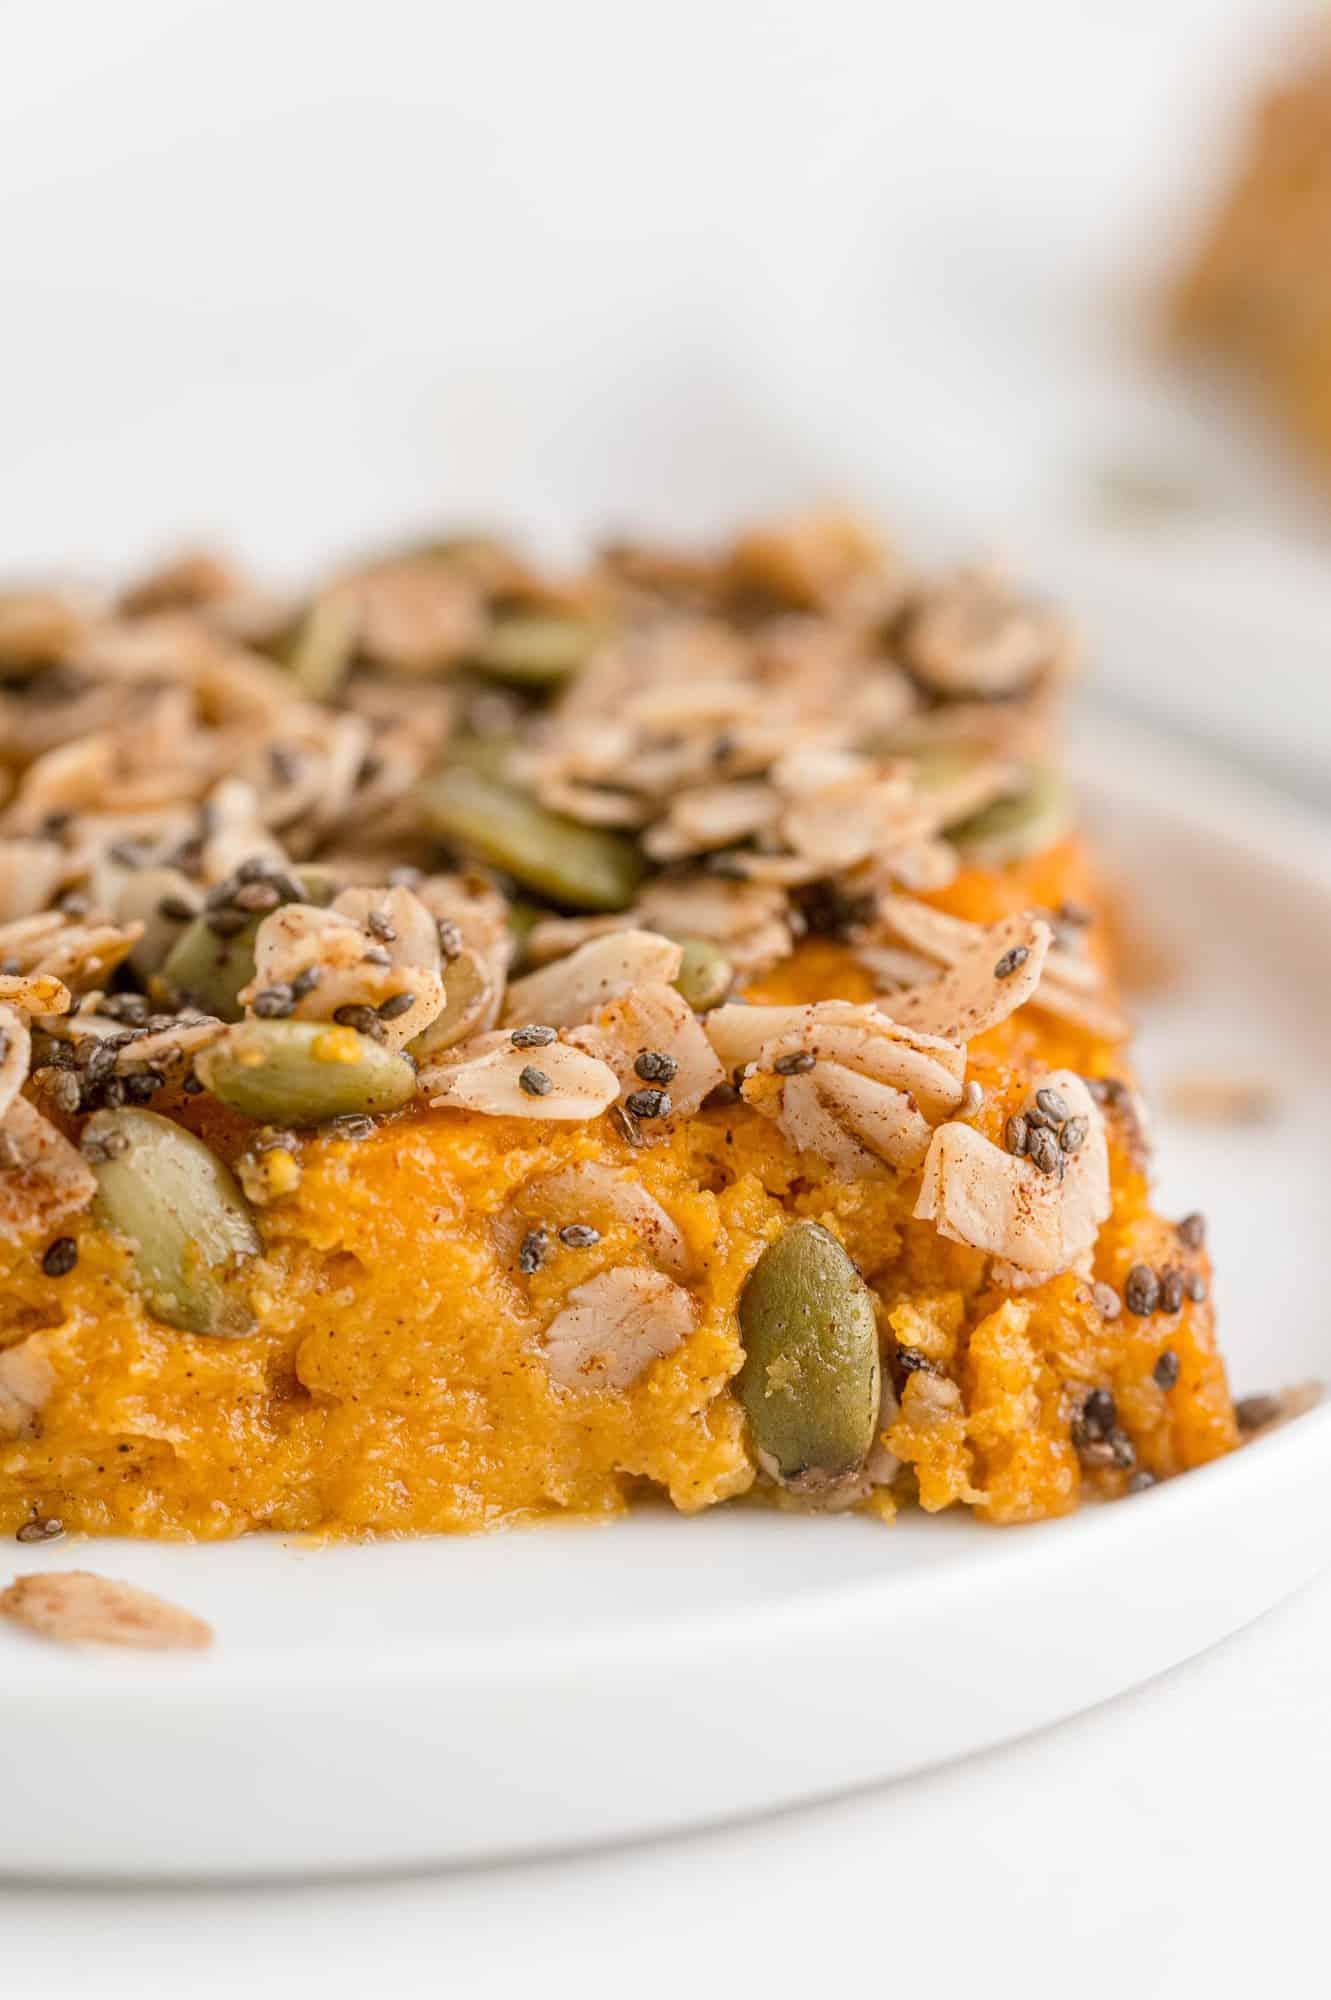 Slice of healthy sweet potato casserole topped with chia seeds, oats, and pepitas.